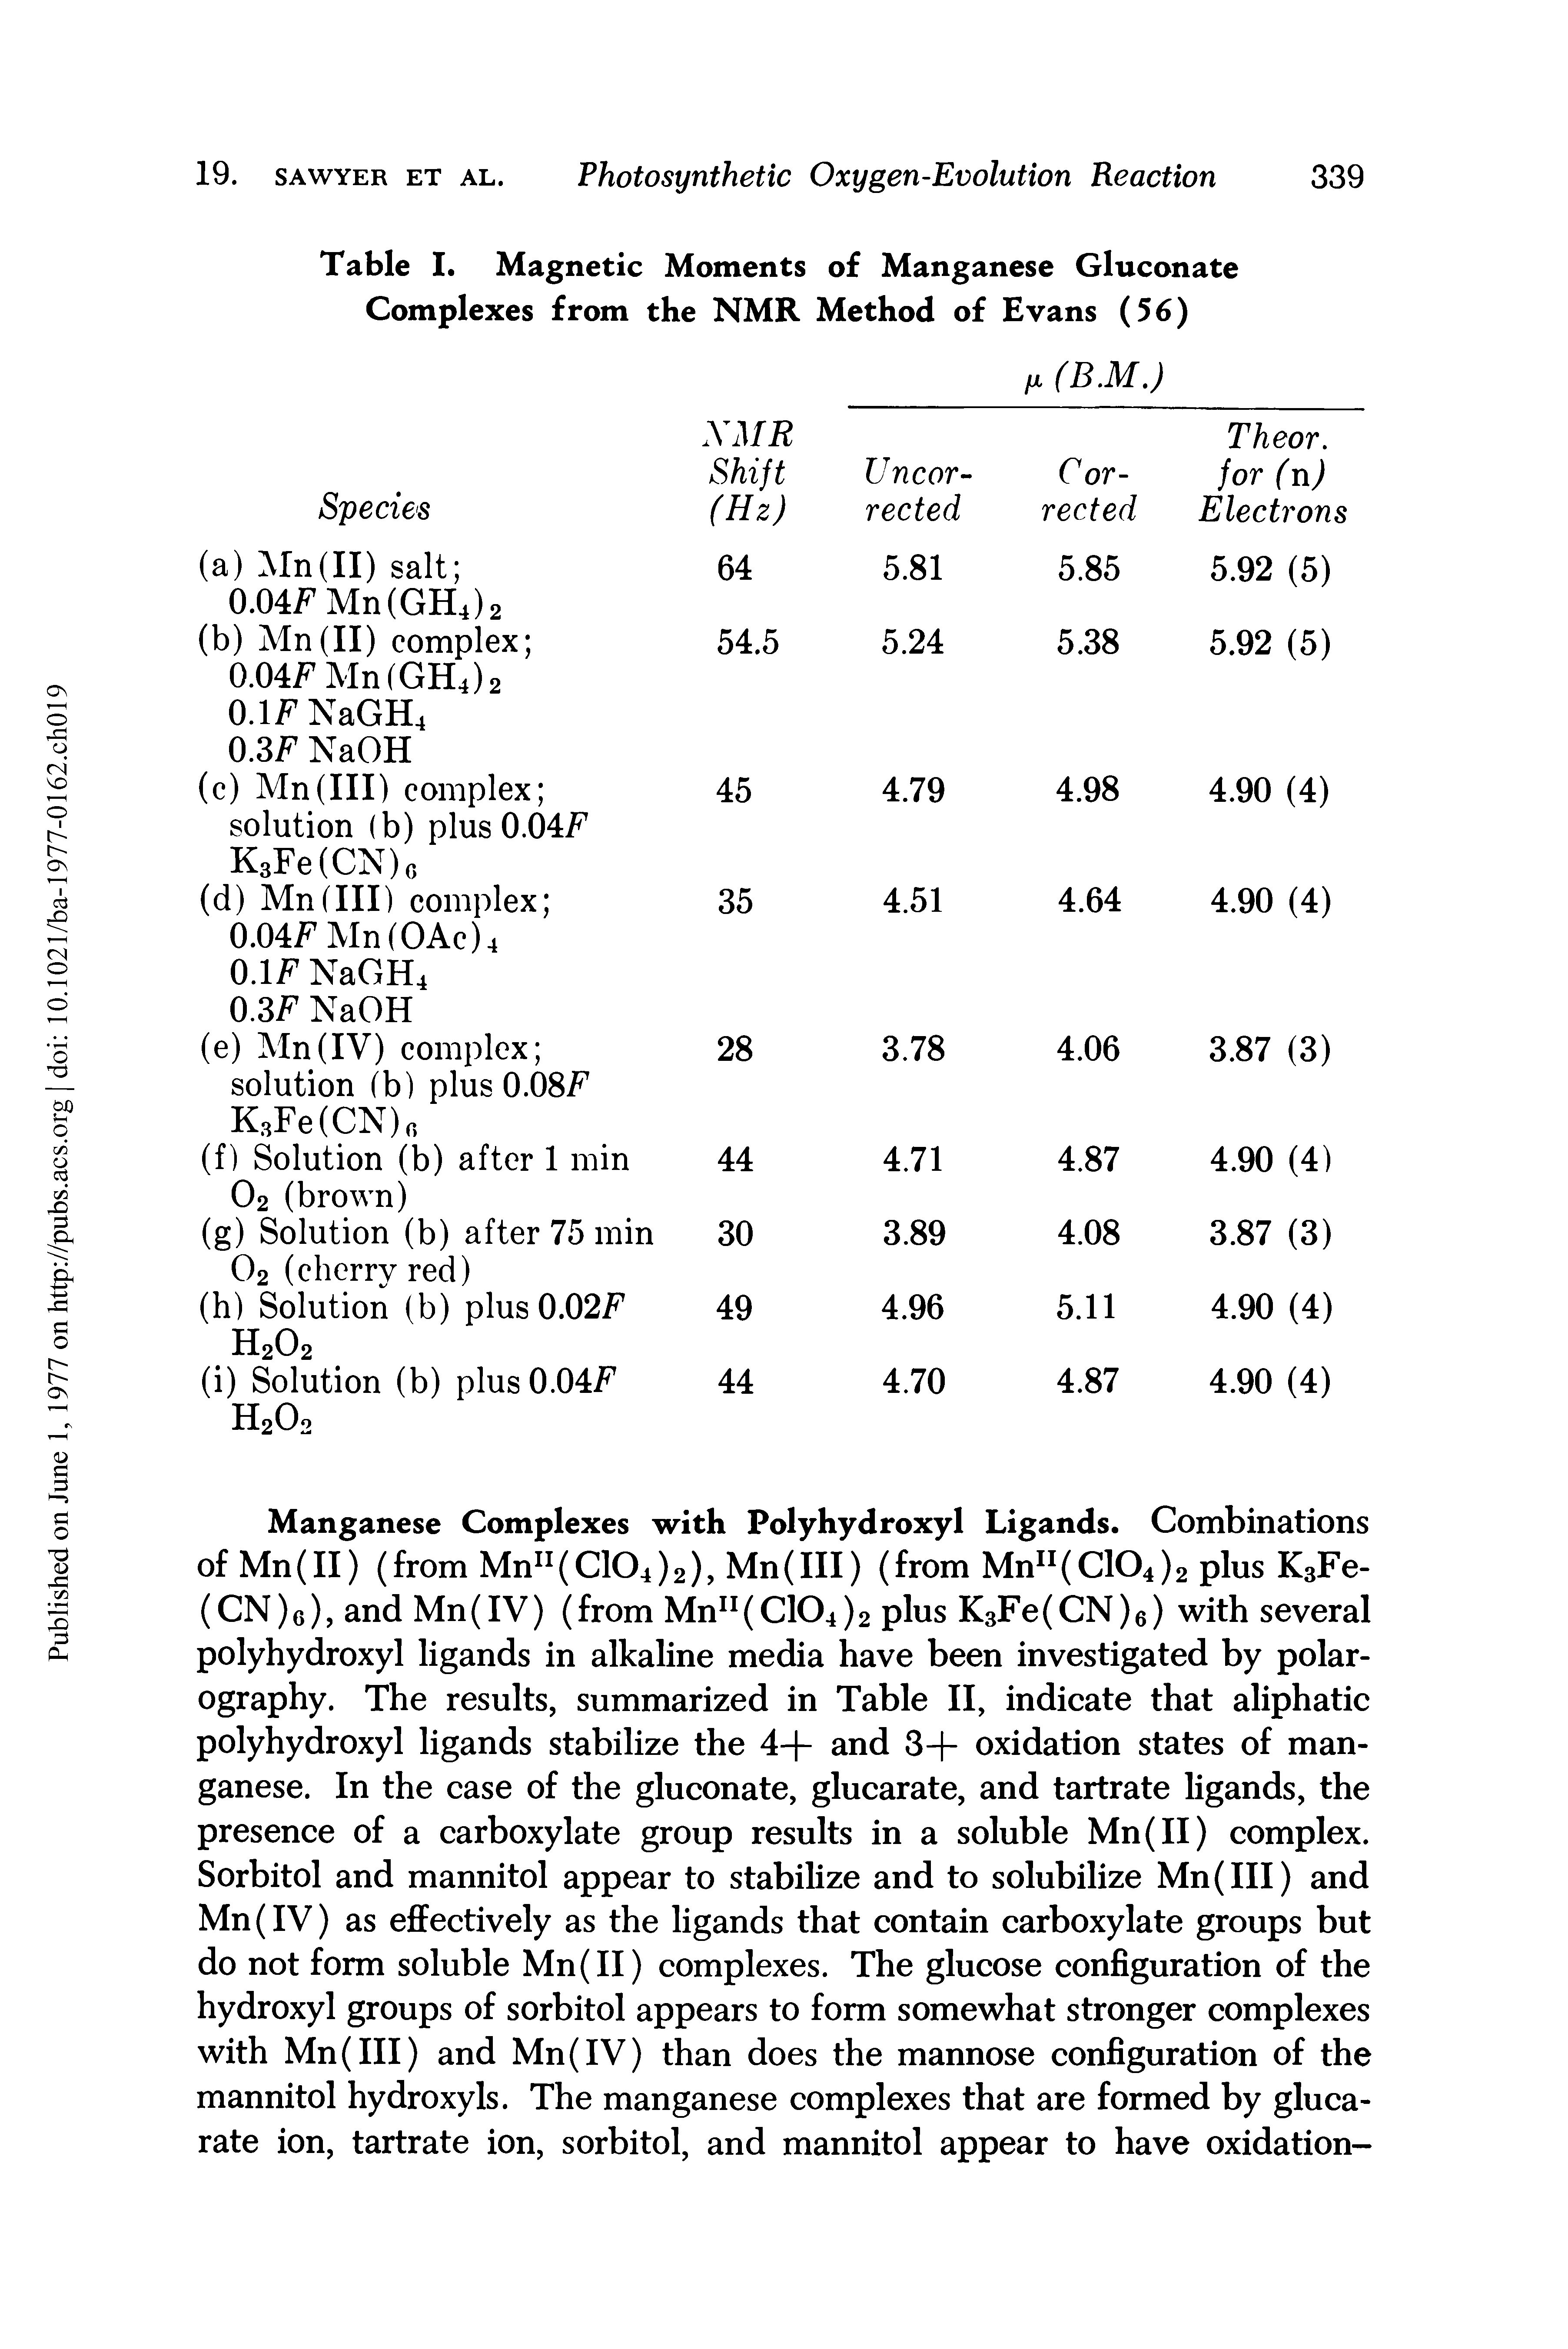 Table I. Magnetic Moments of Manganese Gluconate Complexes from the NMR Method of Evans (56)...